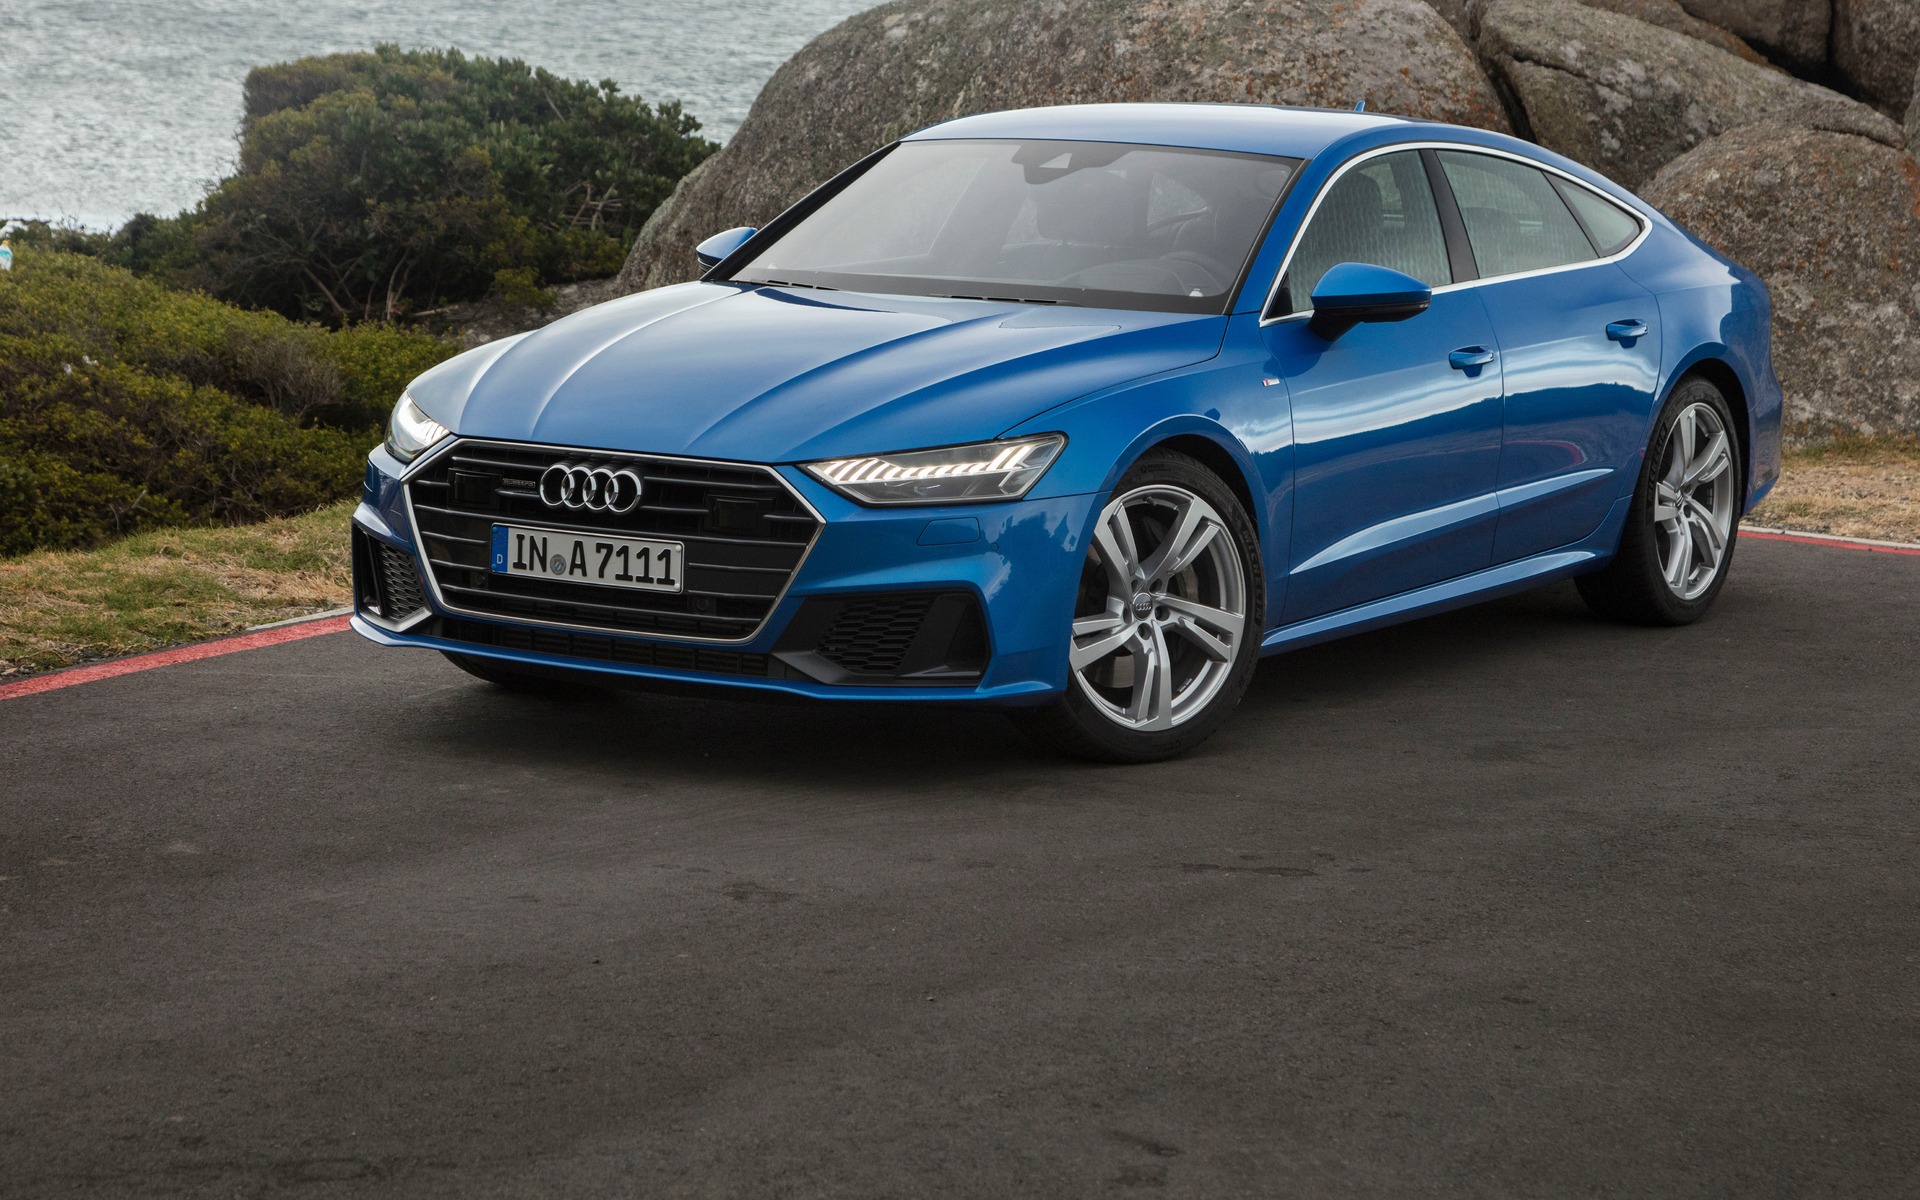 2019 Audi A7 - News, reviews, picture galleries and videos - The